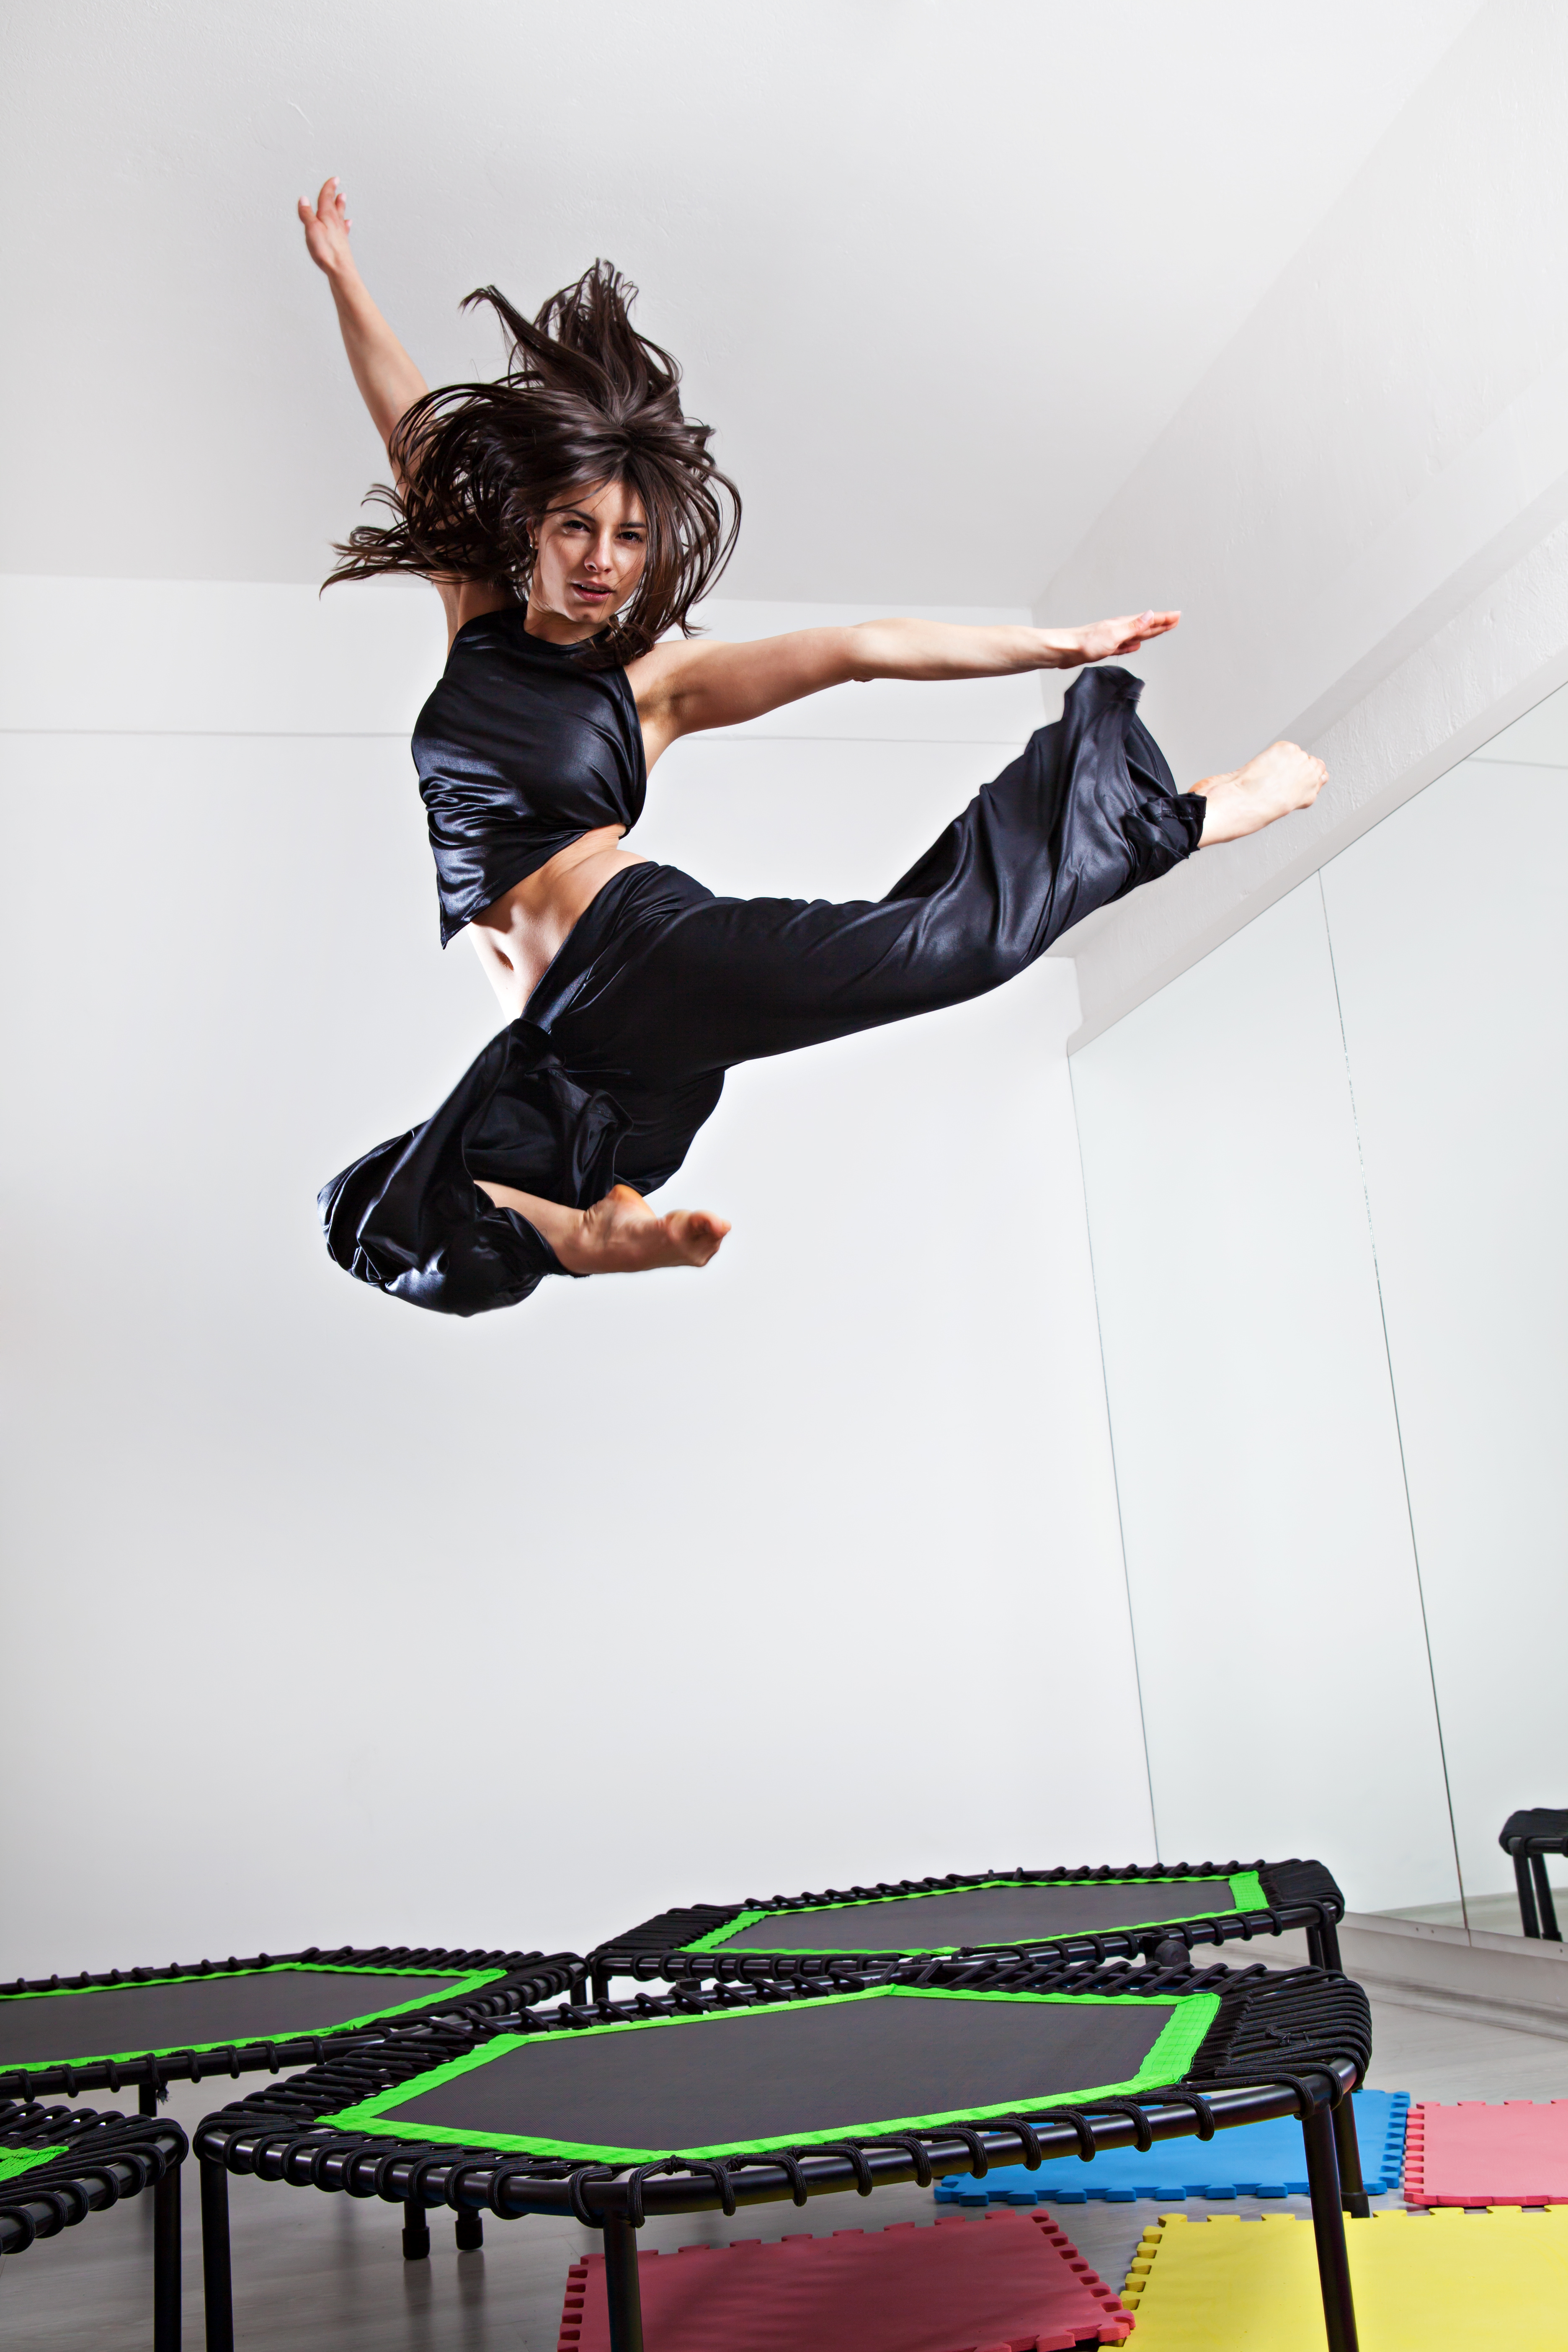 Jumping young woman on a trampoline.